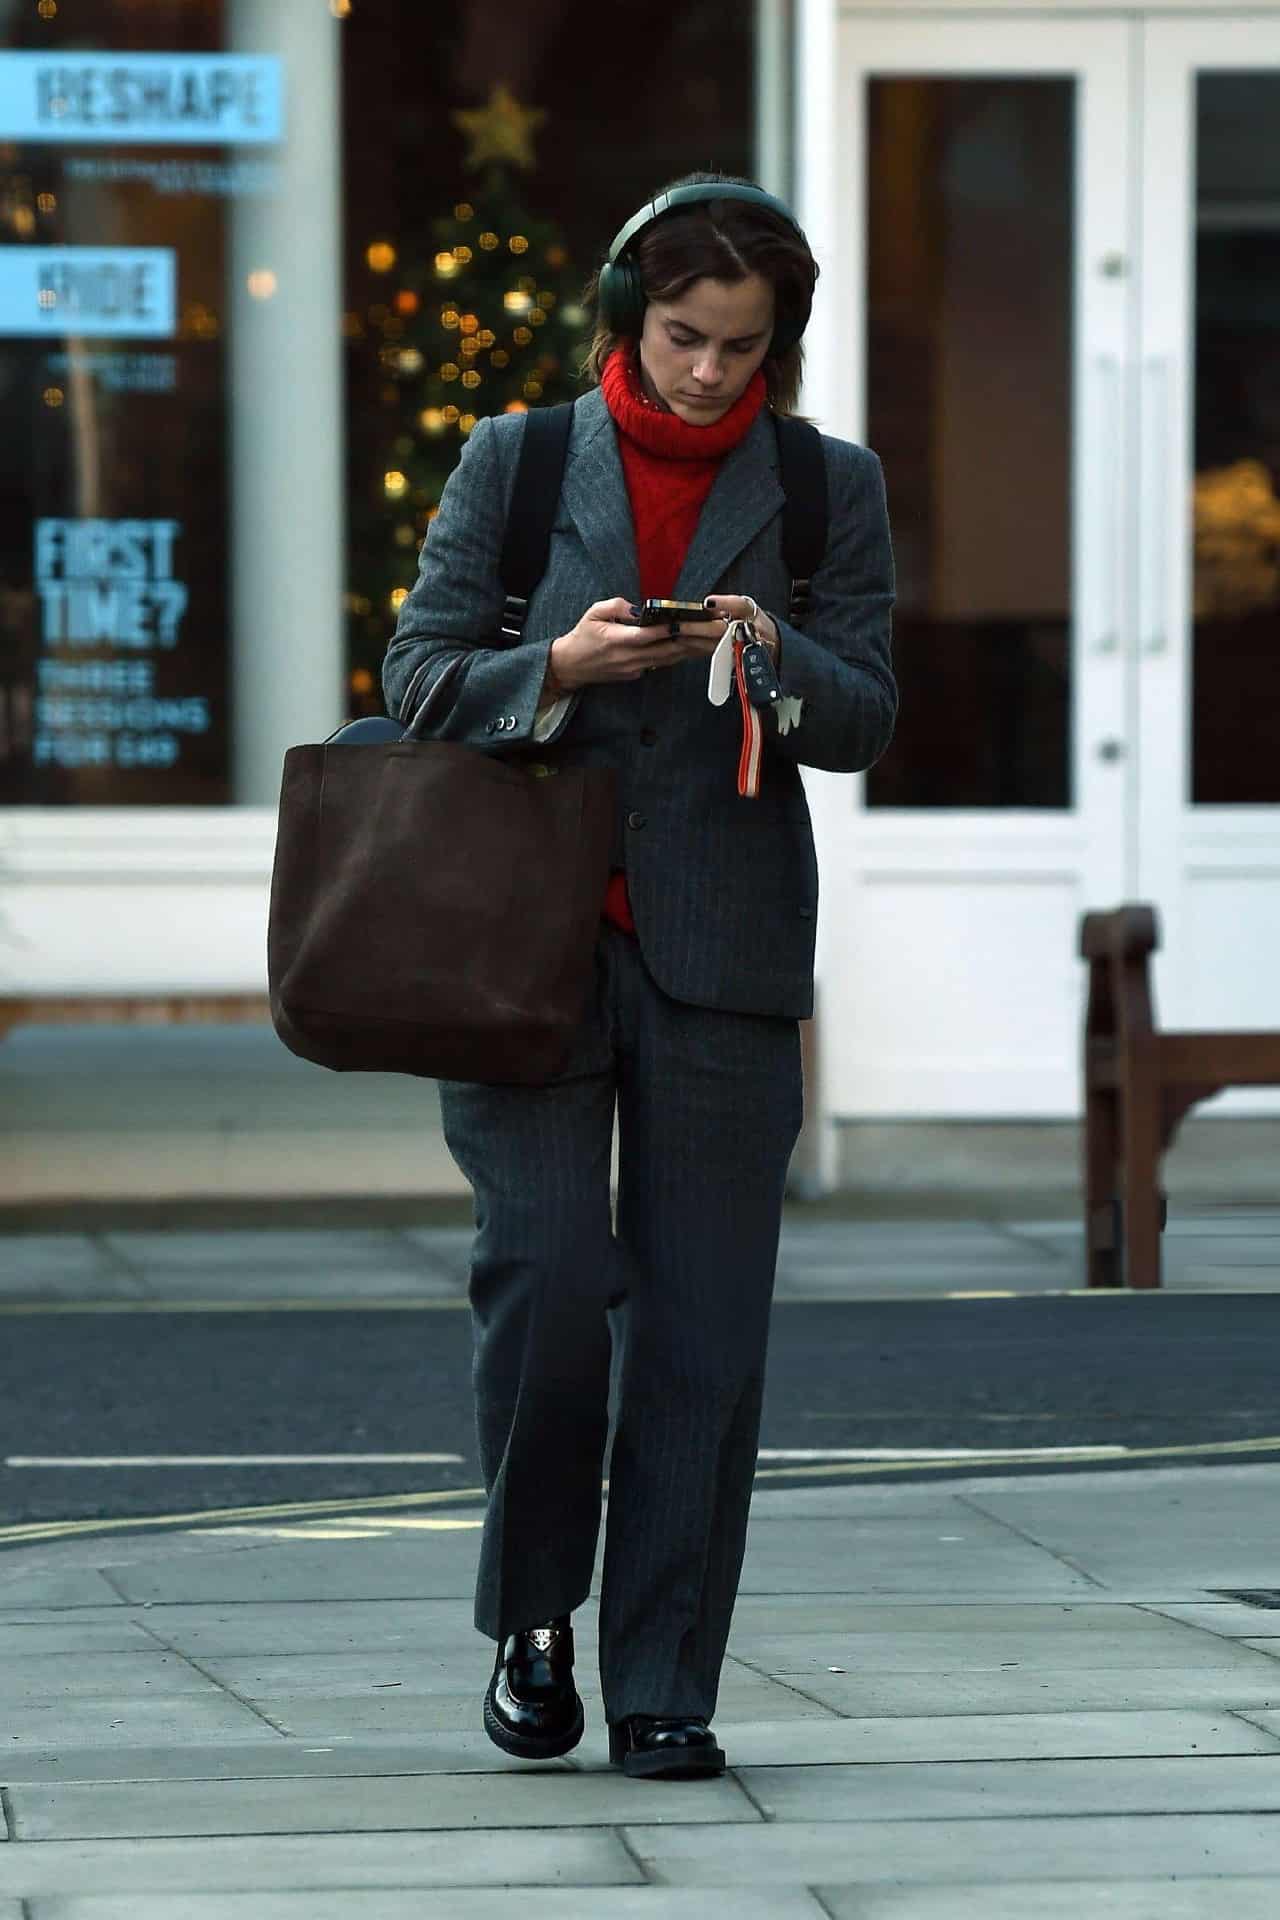 Emma Watson, the Epitome of Smart Casual, Spotted in London